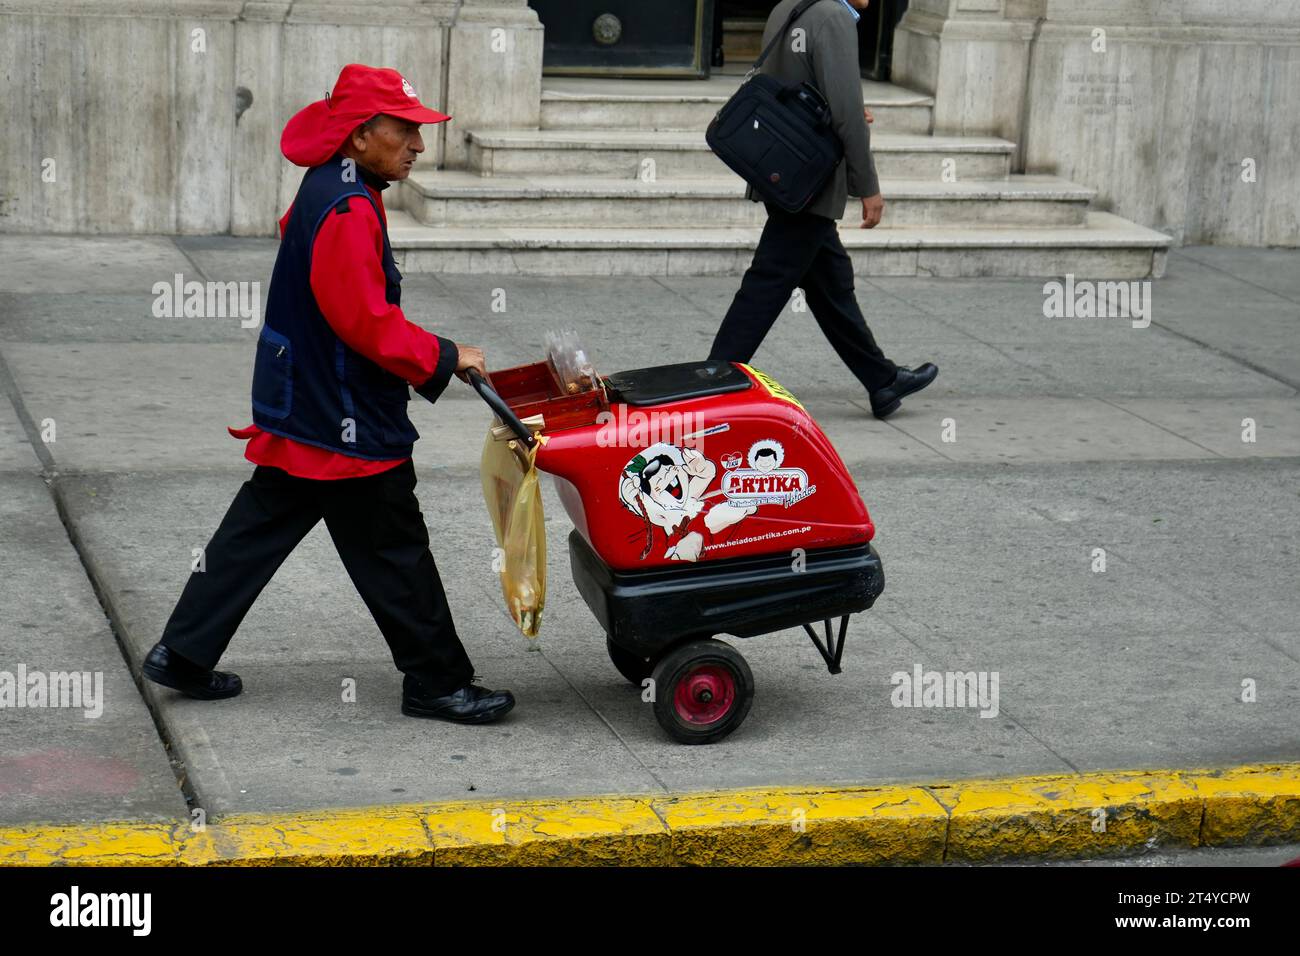 Ice Cream seller pushing a trolley through Lima Old Town. Lima, Peru. Stock Photo